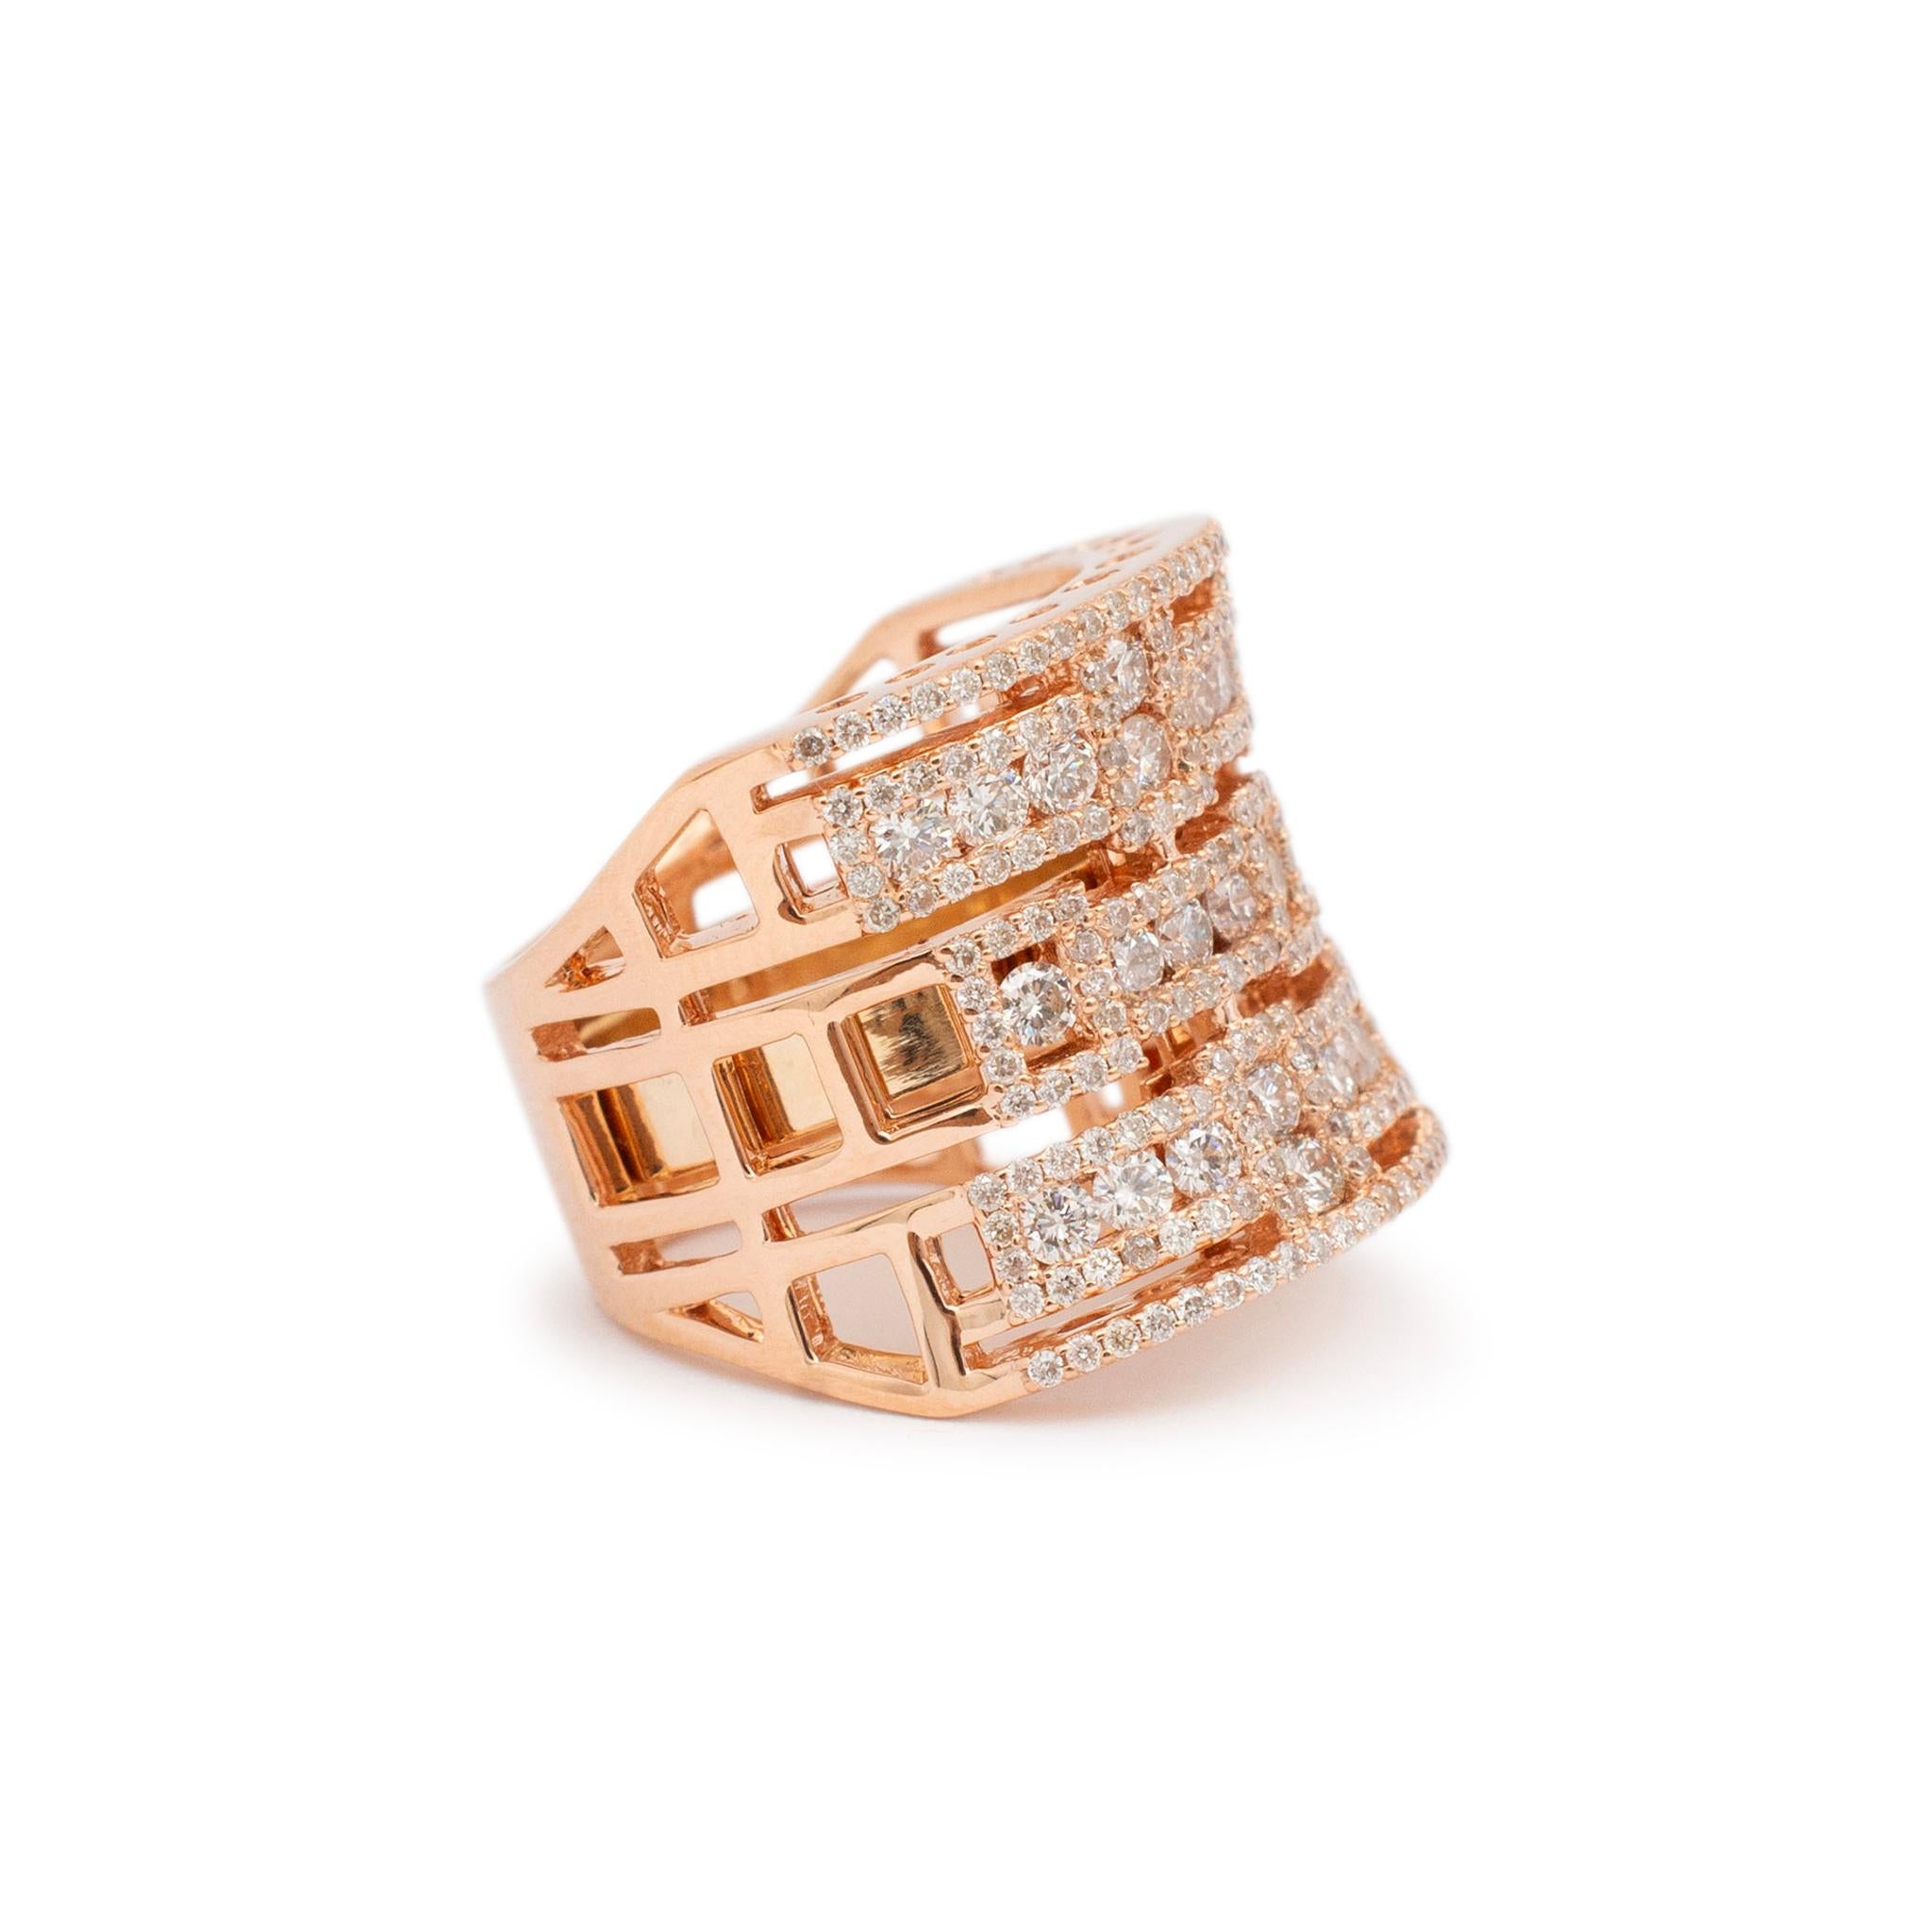 Ladies 18K Rose Gold Three Row Cluster Diamond Cocktail Ring In Excellent Condition For Sale In Houston, TX